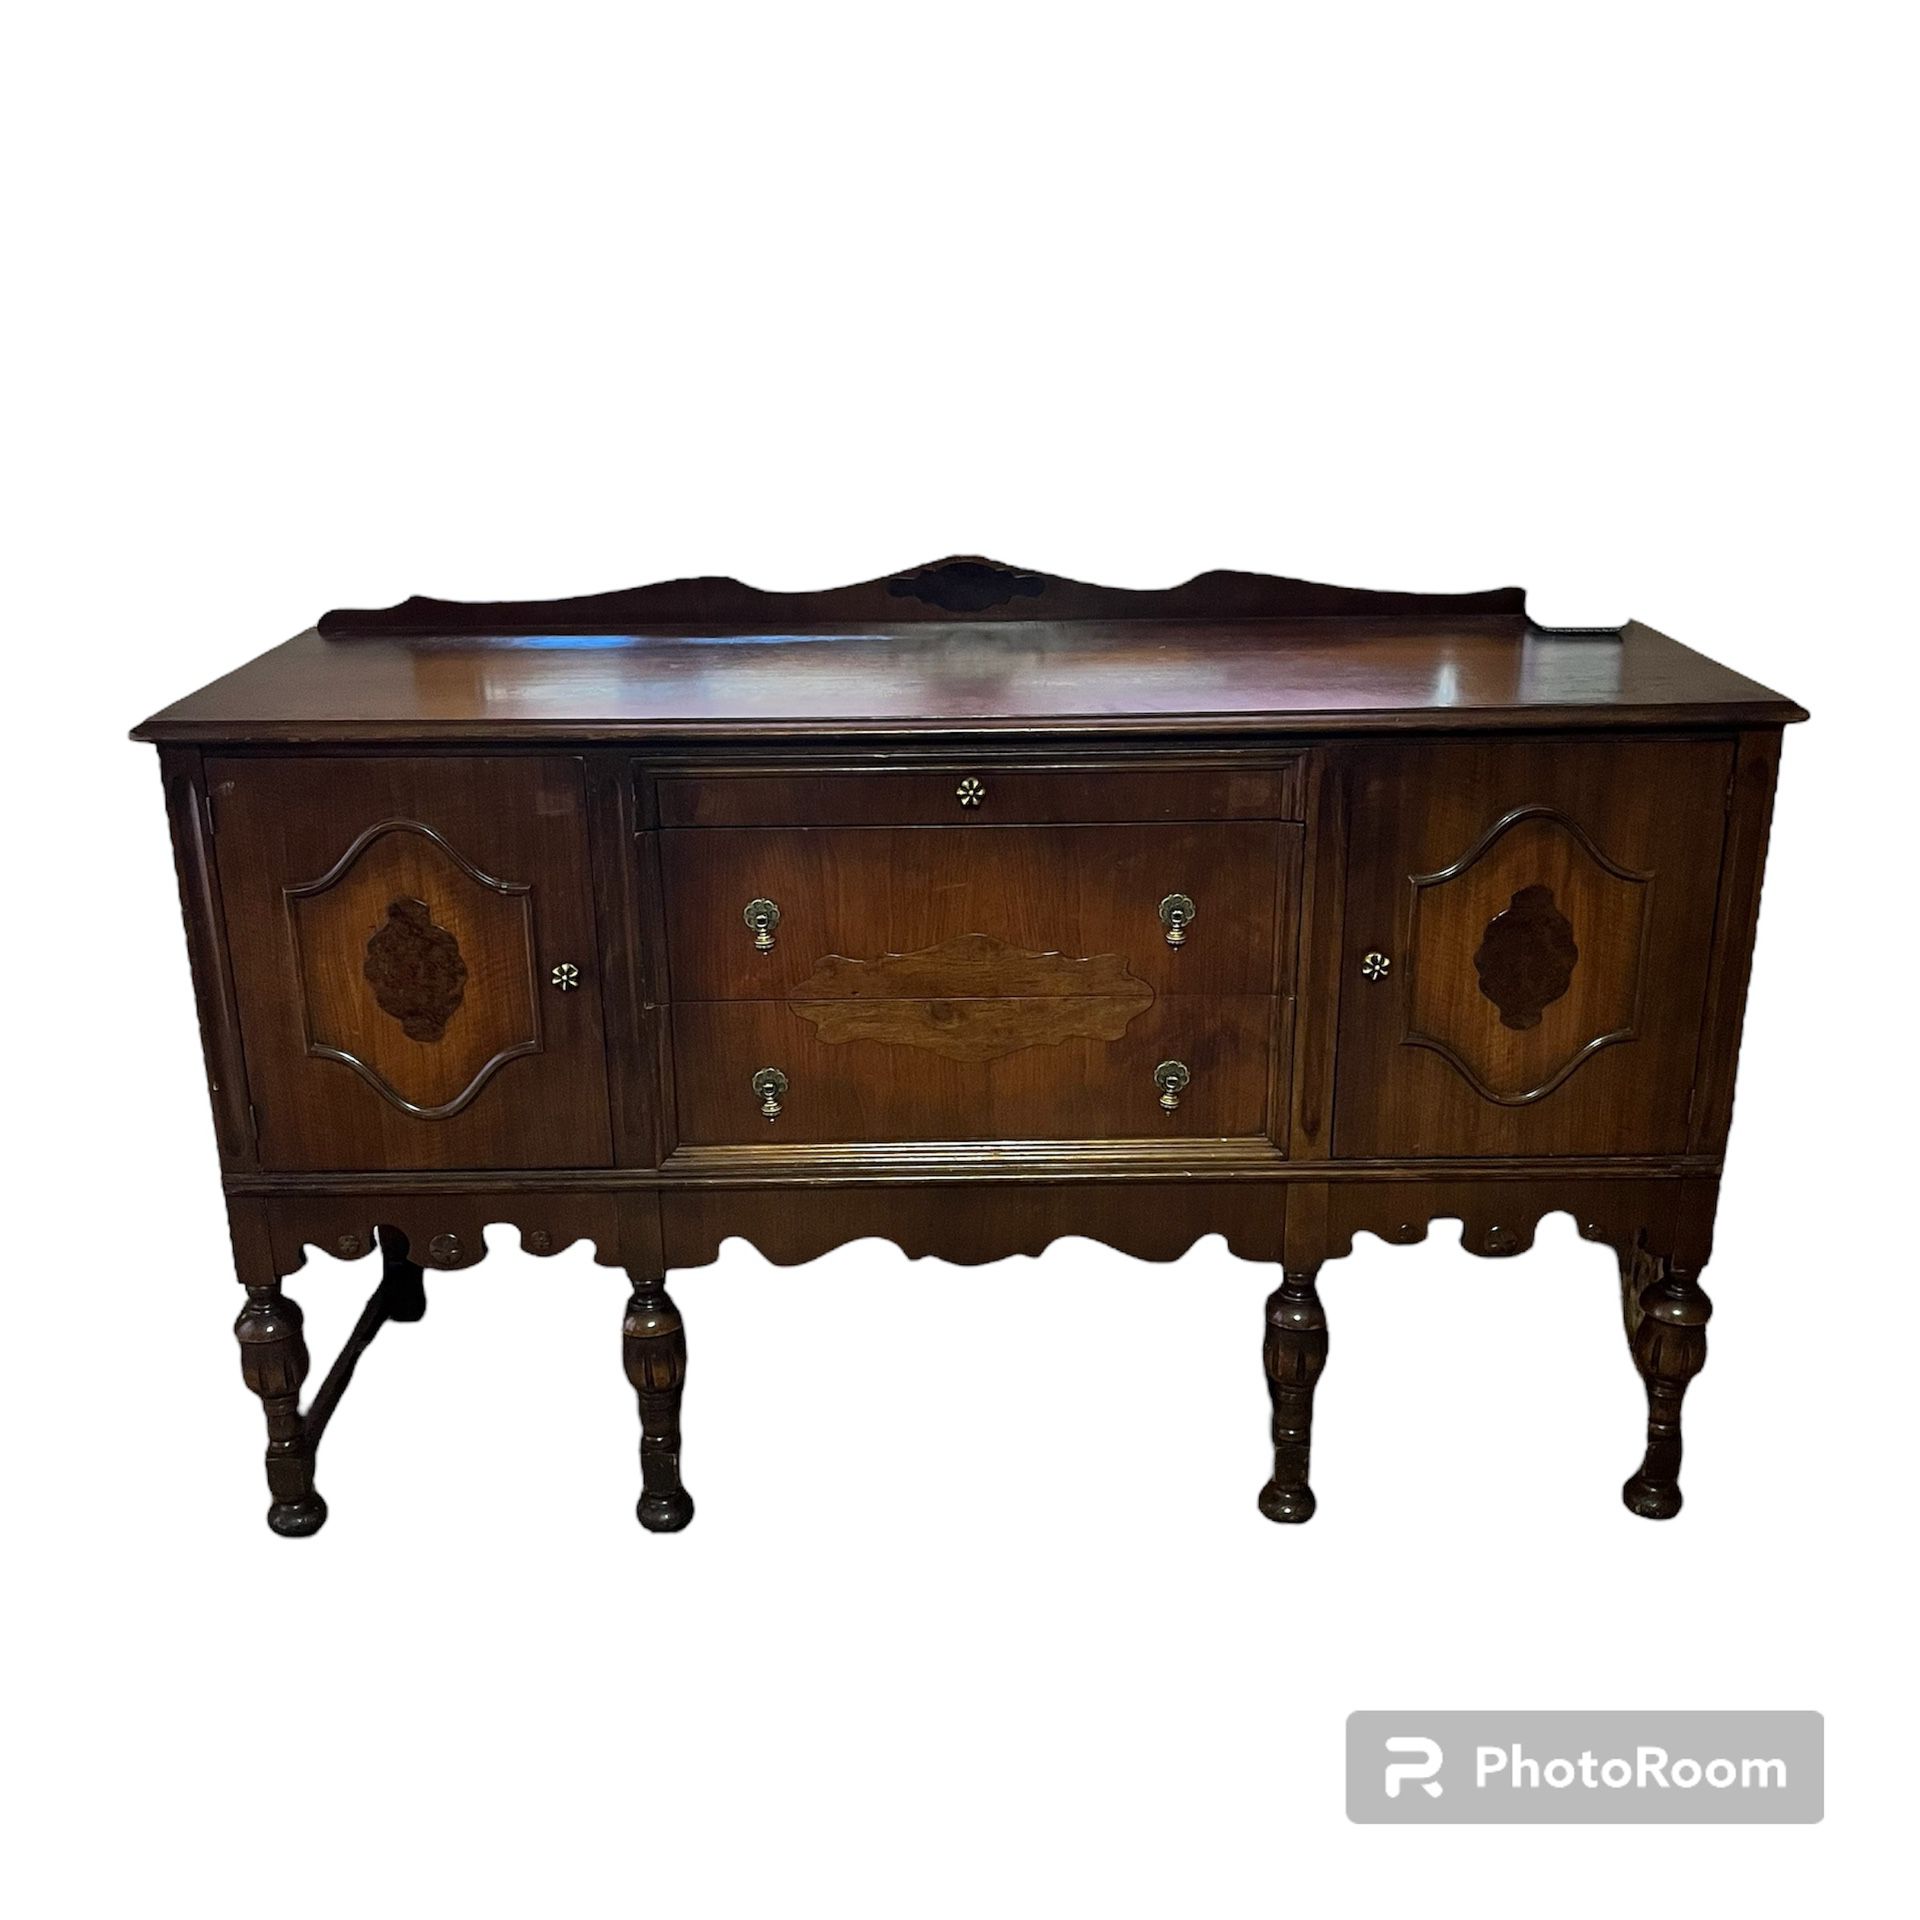 Antique 1920s Black Walnut Sideboard Hardware Is Original And Even Drawers Are Solid Wood